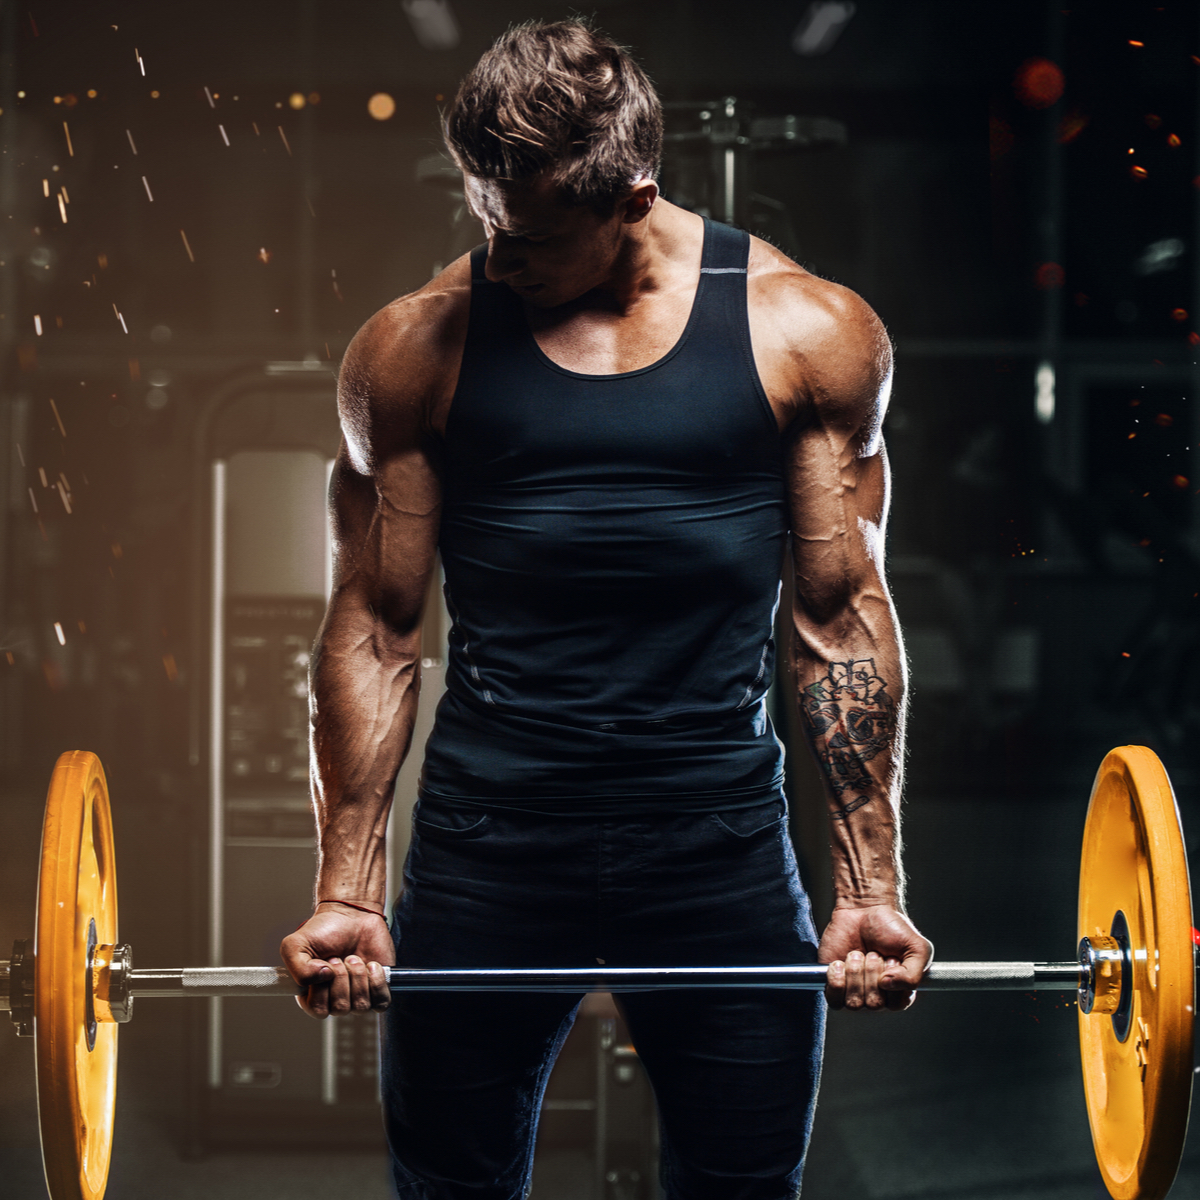 How to Increase Human Growth Hormone (HGH) Naturally